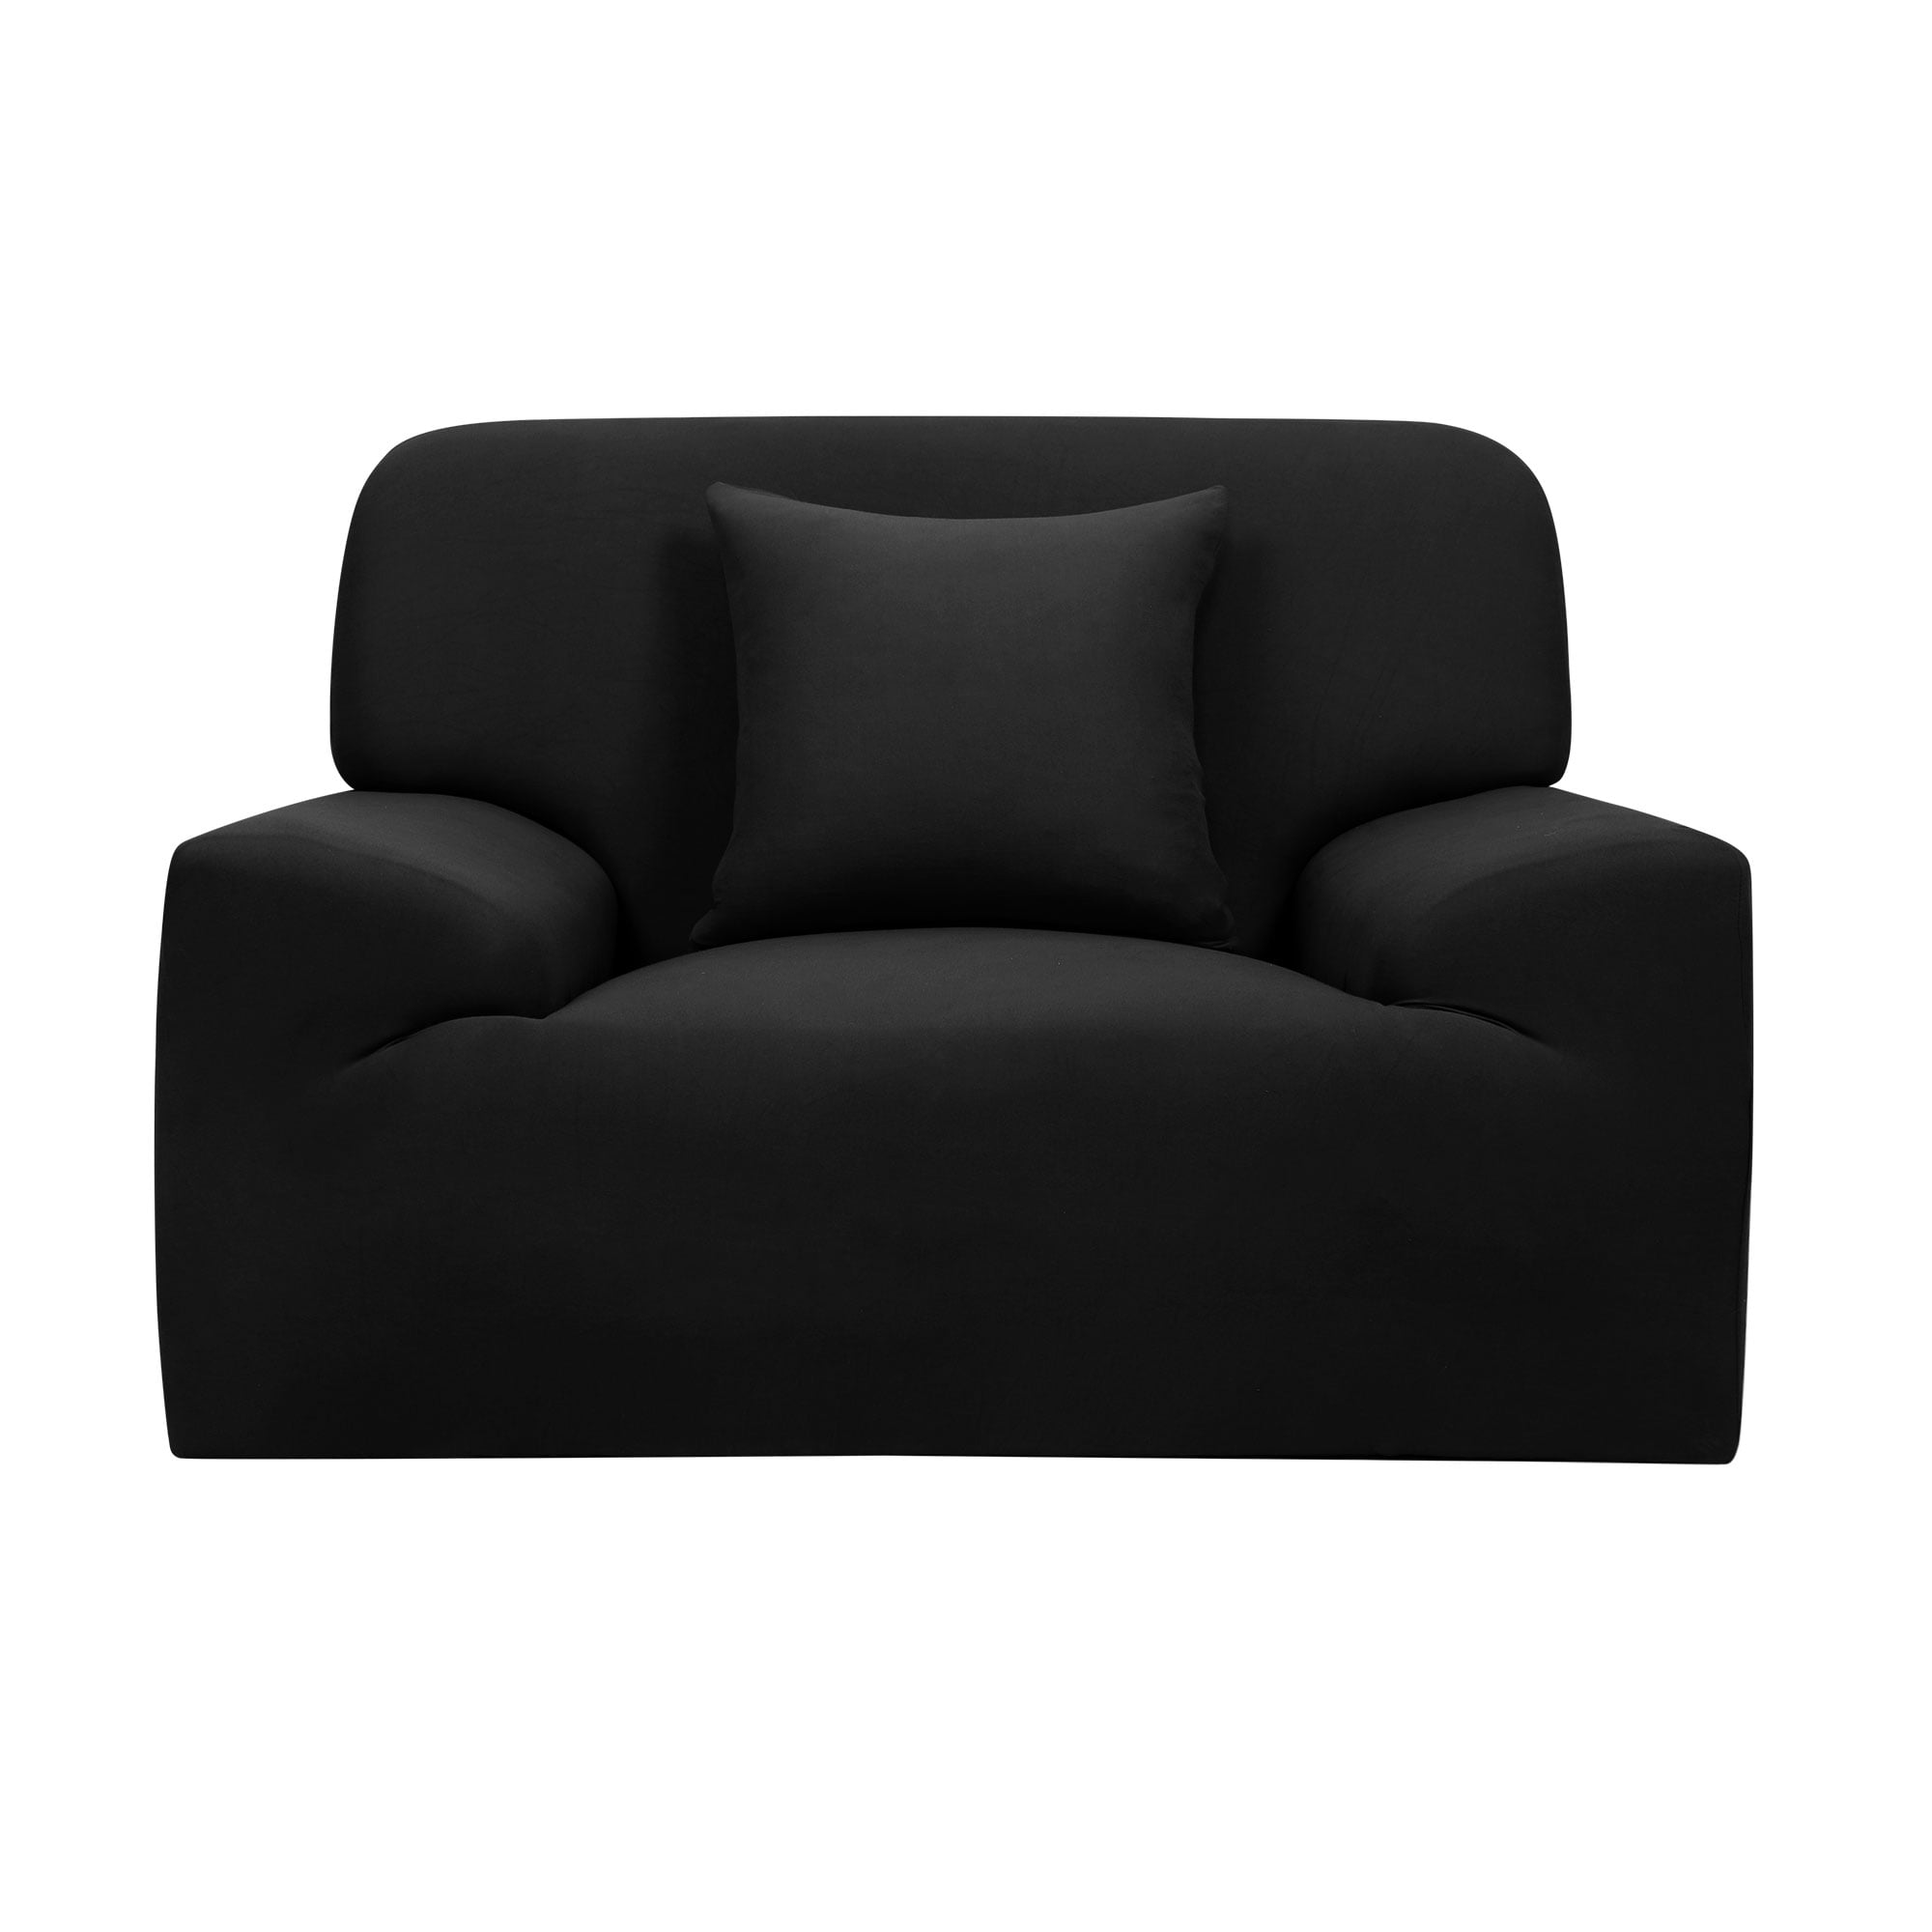 BLACK JERSEY RECLINER STRETCH SLIPCOVER COUCH COVER FURNITURE SOFA KASHI HOME 